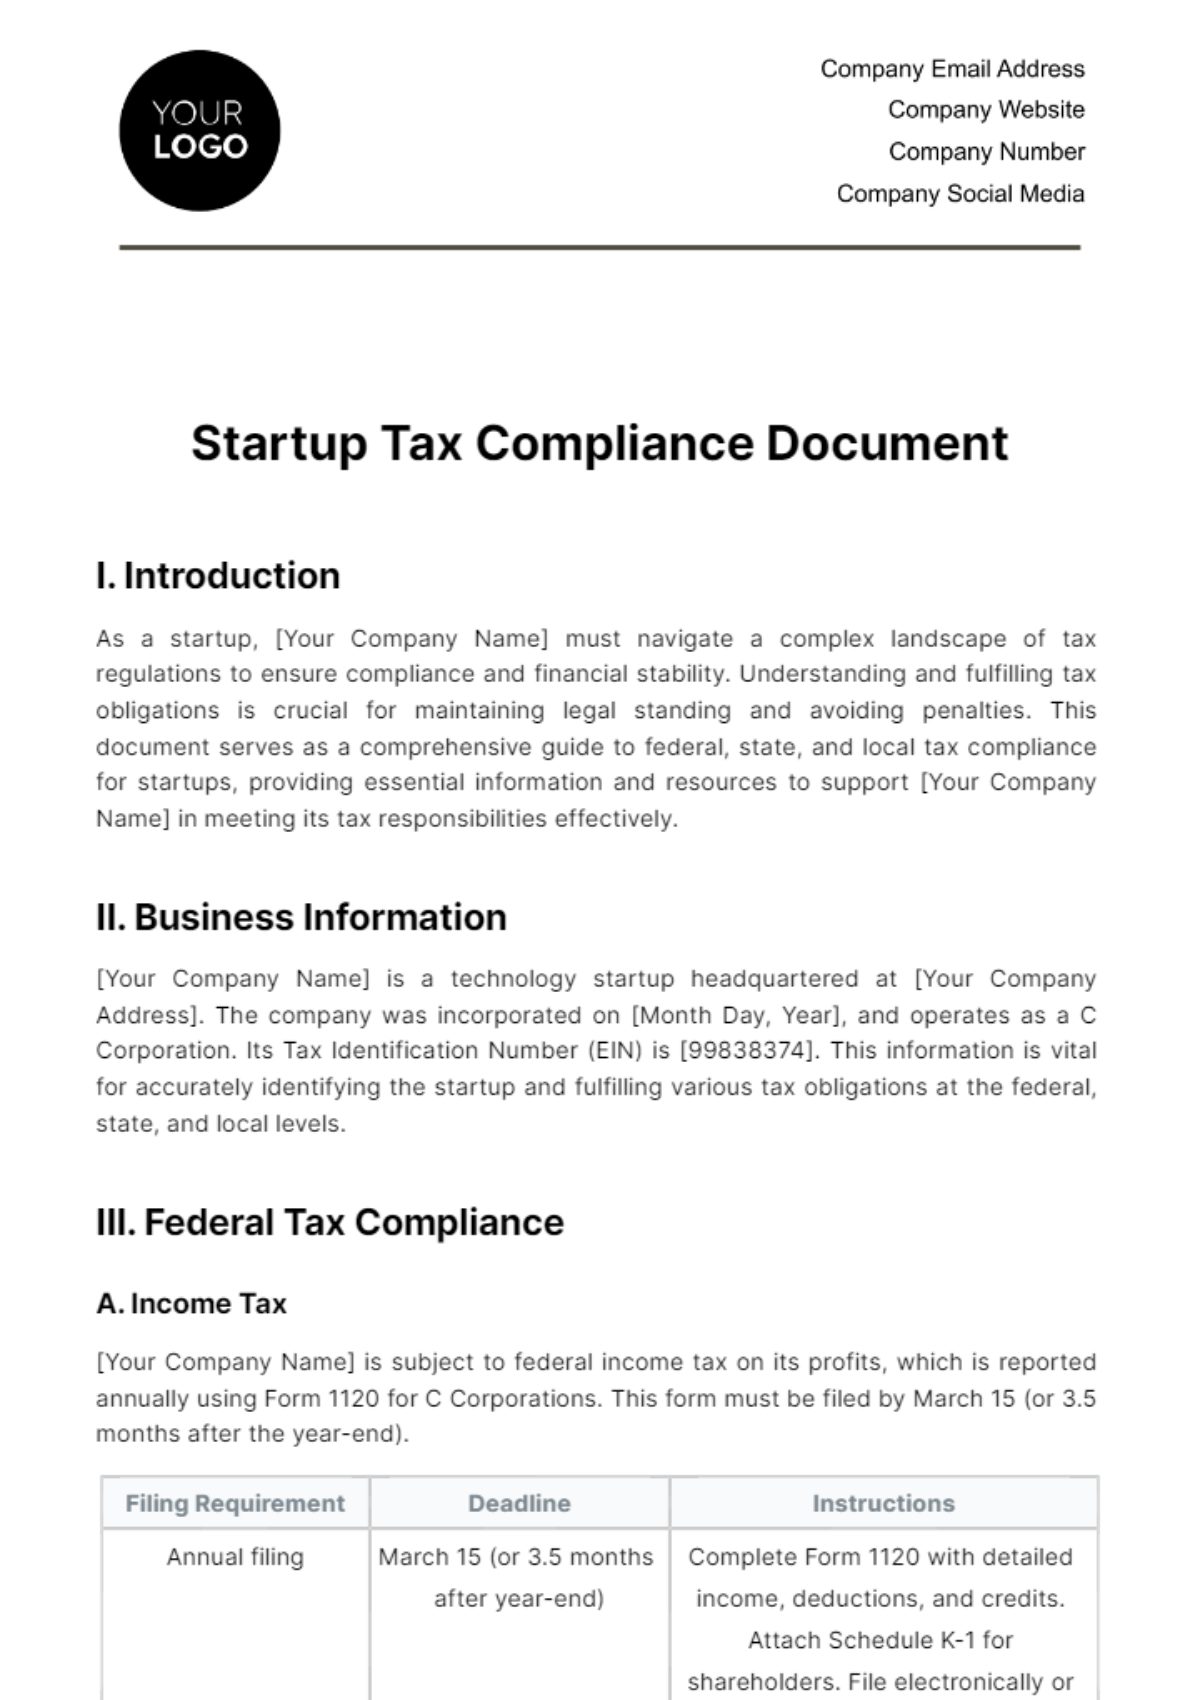 Startup Tax Compliance Document Template